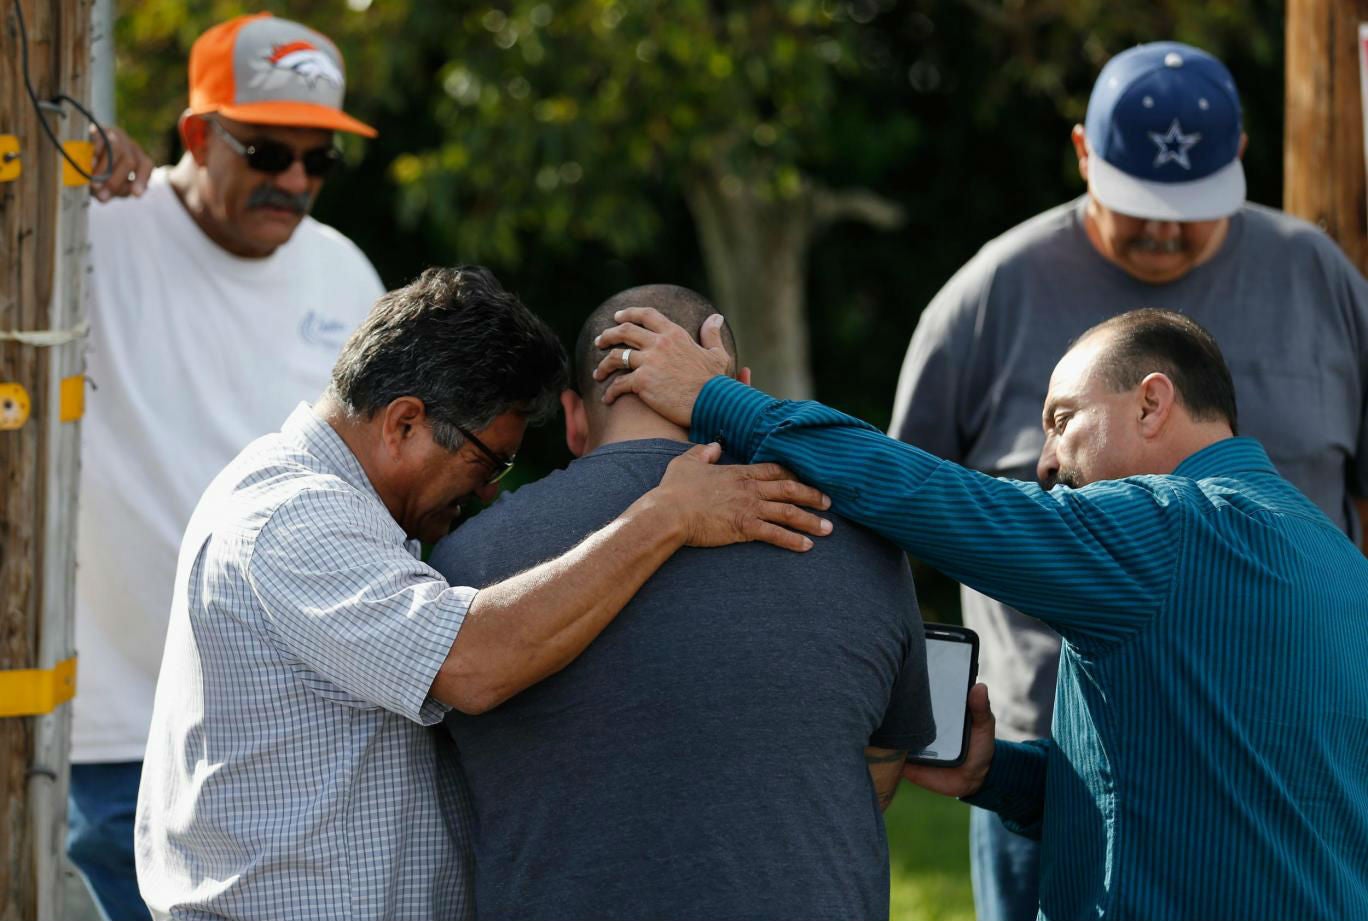 San Bernardino is struggling to deal with the aftermath of the shooting